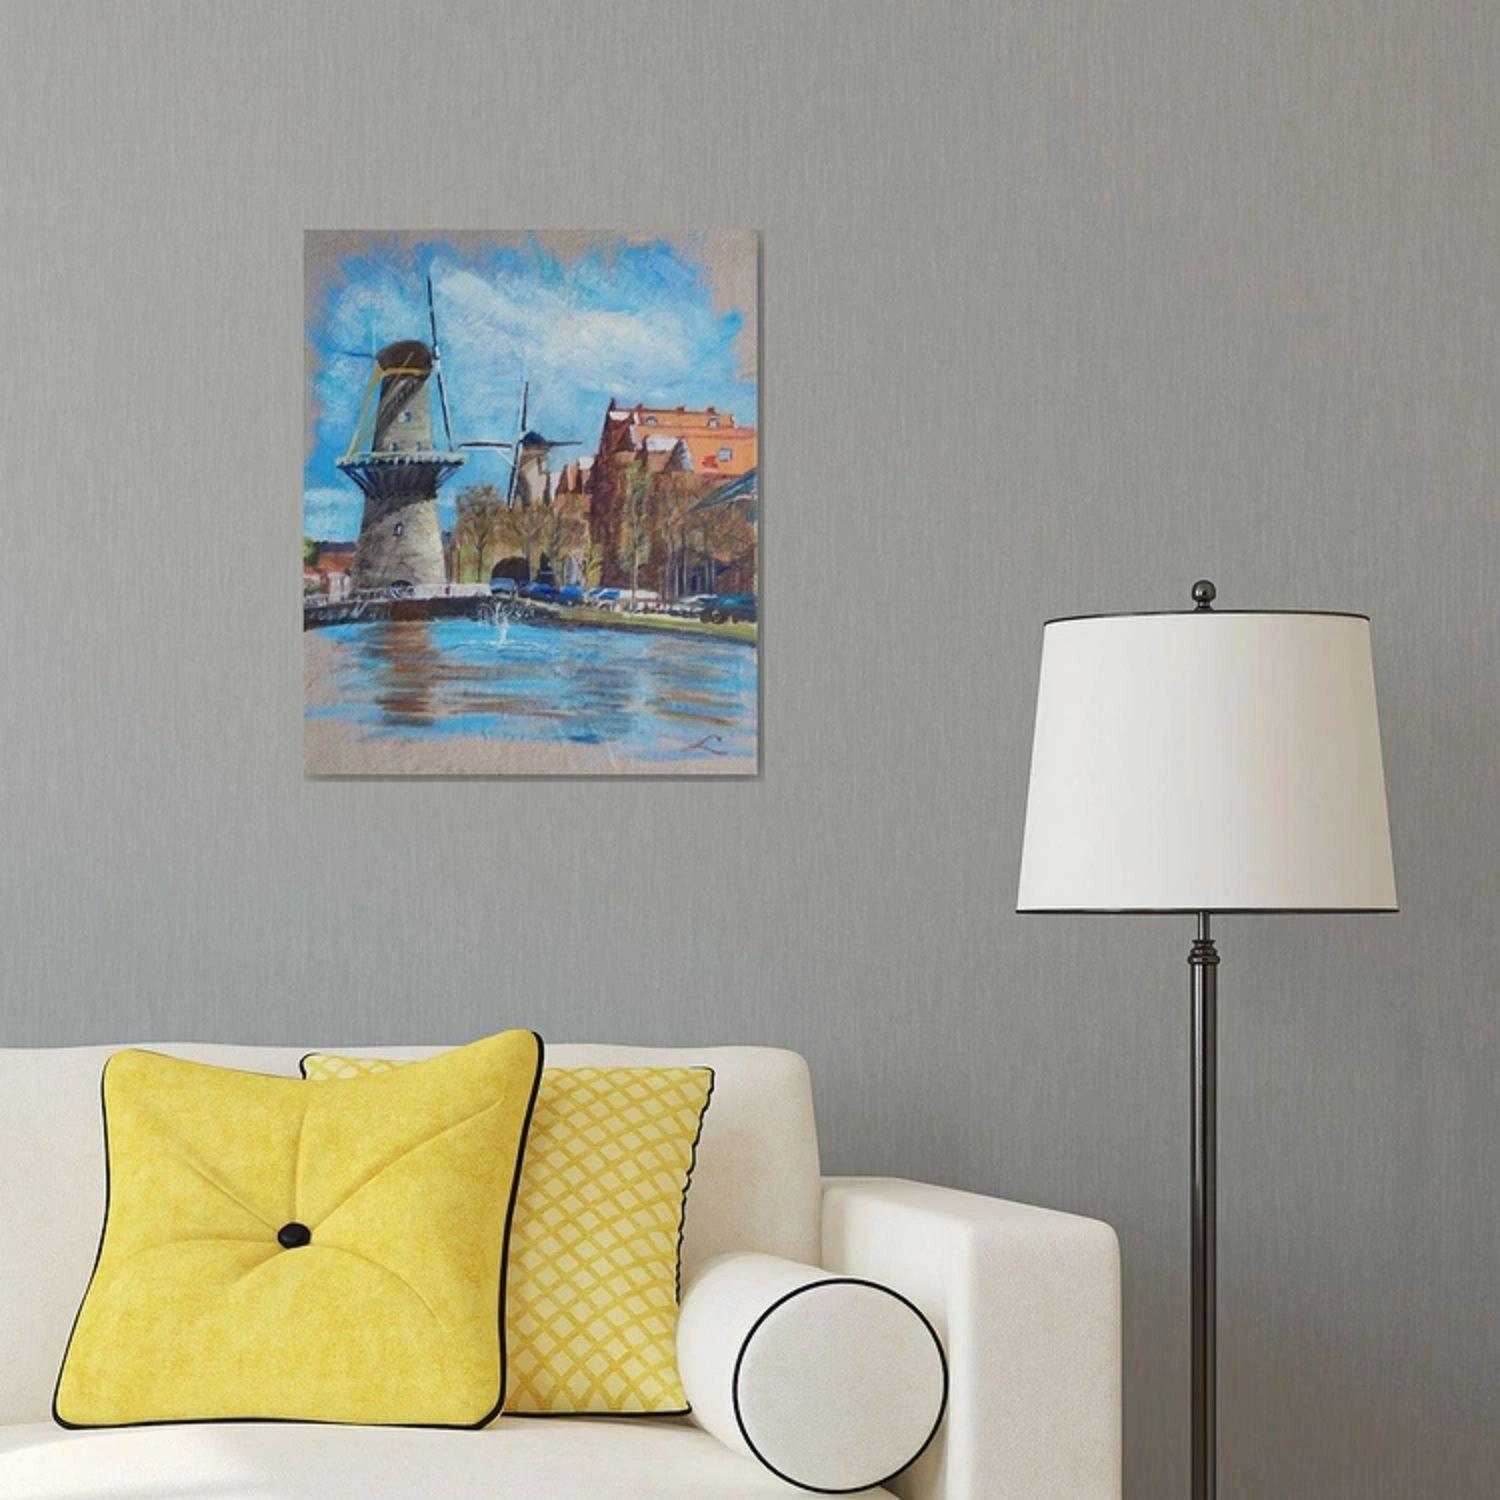 The view of Schiedam, cityscape with windmills, channel and reflections, painted by oil on a jute canvas. :: Painting :: Impressionist :: This piece comes with an official certificate of authenticity signed by the artist :: Ready to Hang: Yes ::